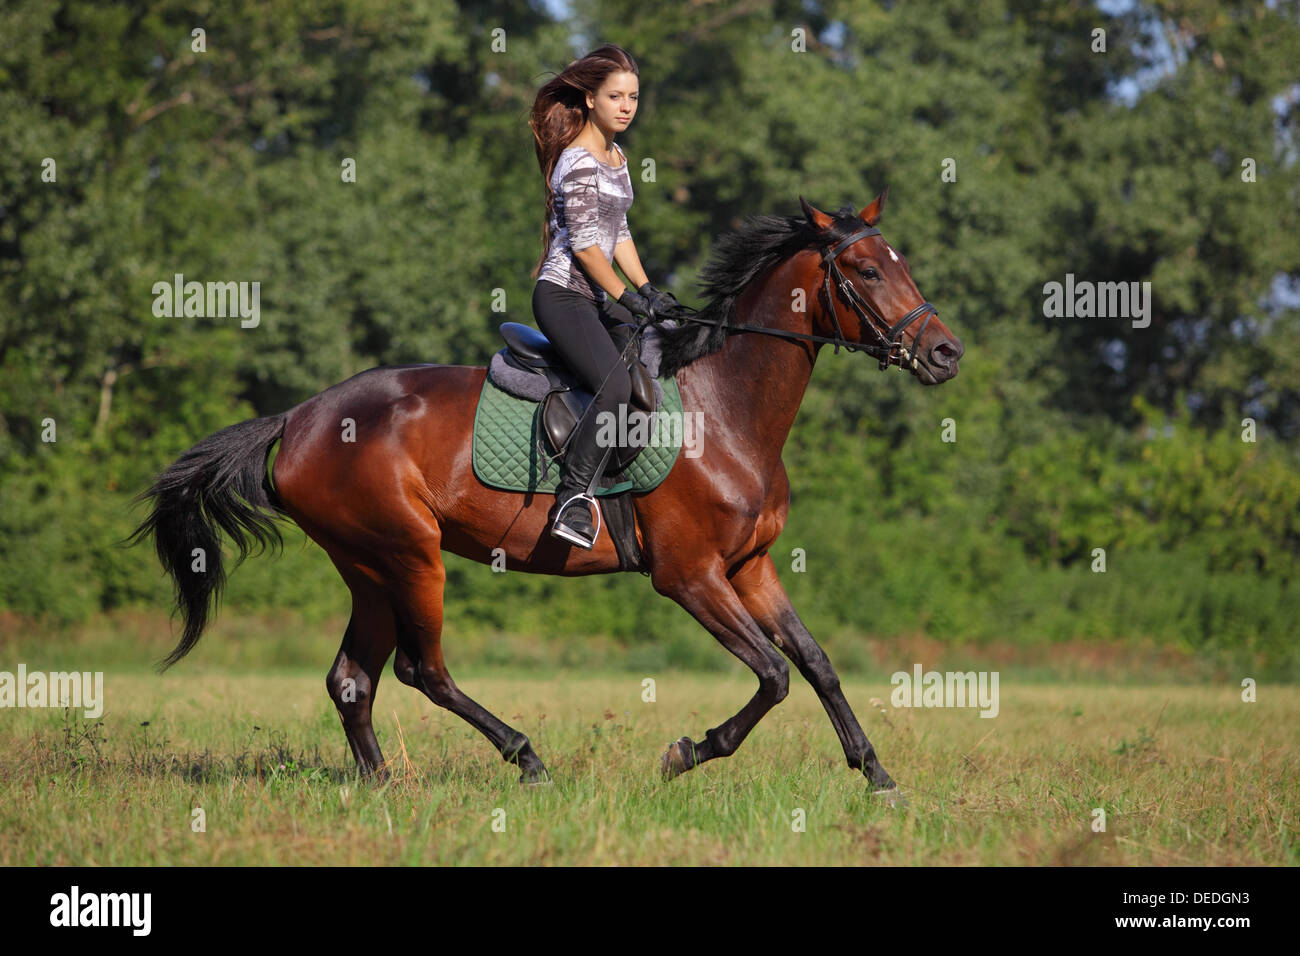 Beautiful young brunette woman with long hair riding on a brown horse at sunset Stock Photo